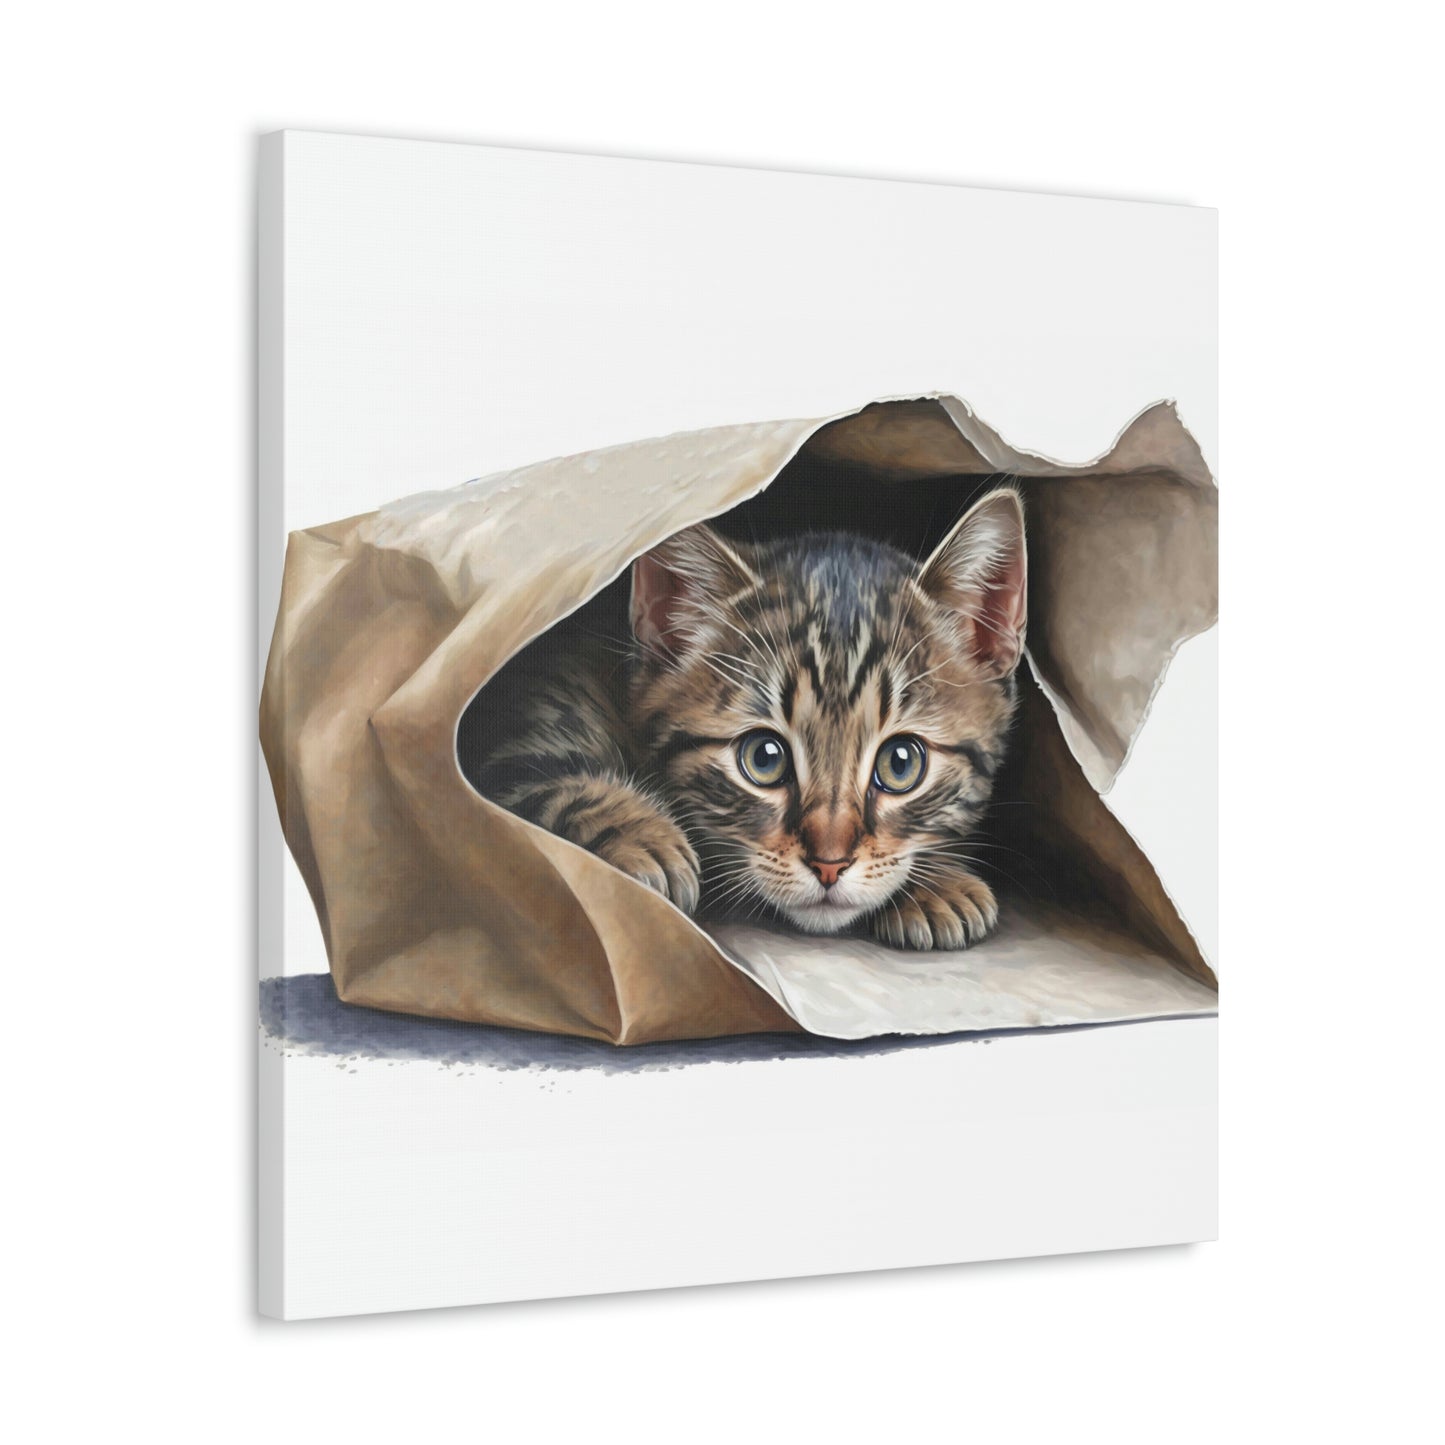 "Cute Kitten Hiding" Wall Art - Weave Got Gifts - Unique Gifts You Won’t Find Anywhere Else!